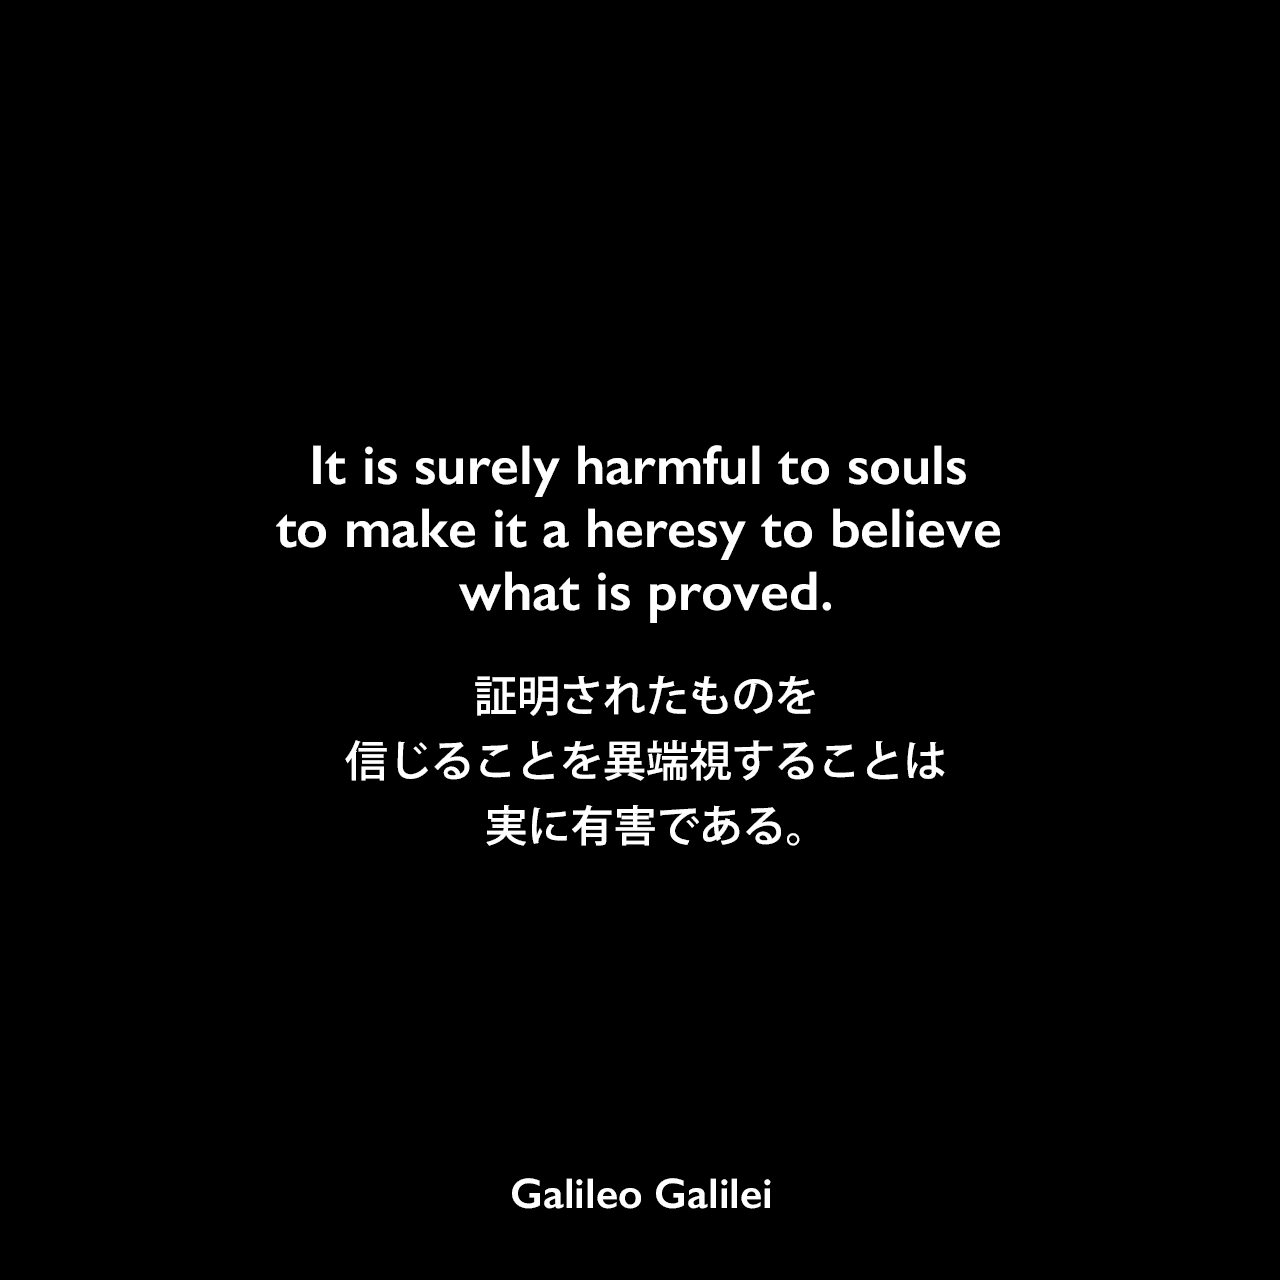 It is surely harmful to souls to make it a heresy to believe what is proved.証明されたものを信じることを異端視することは実に有害である。Galileo Galilei